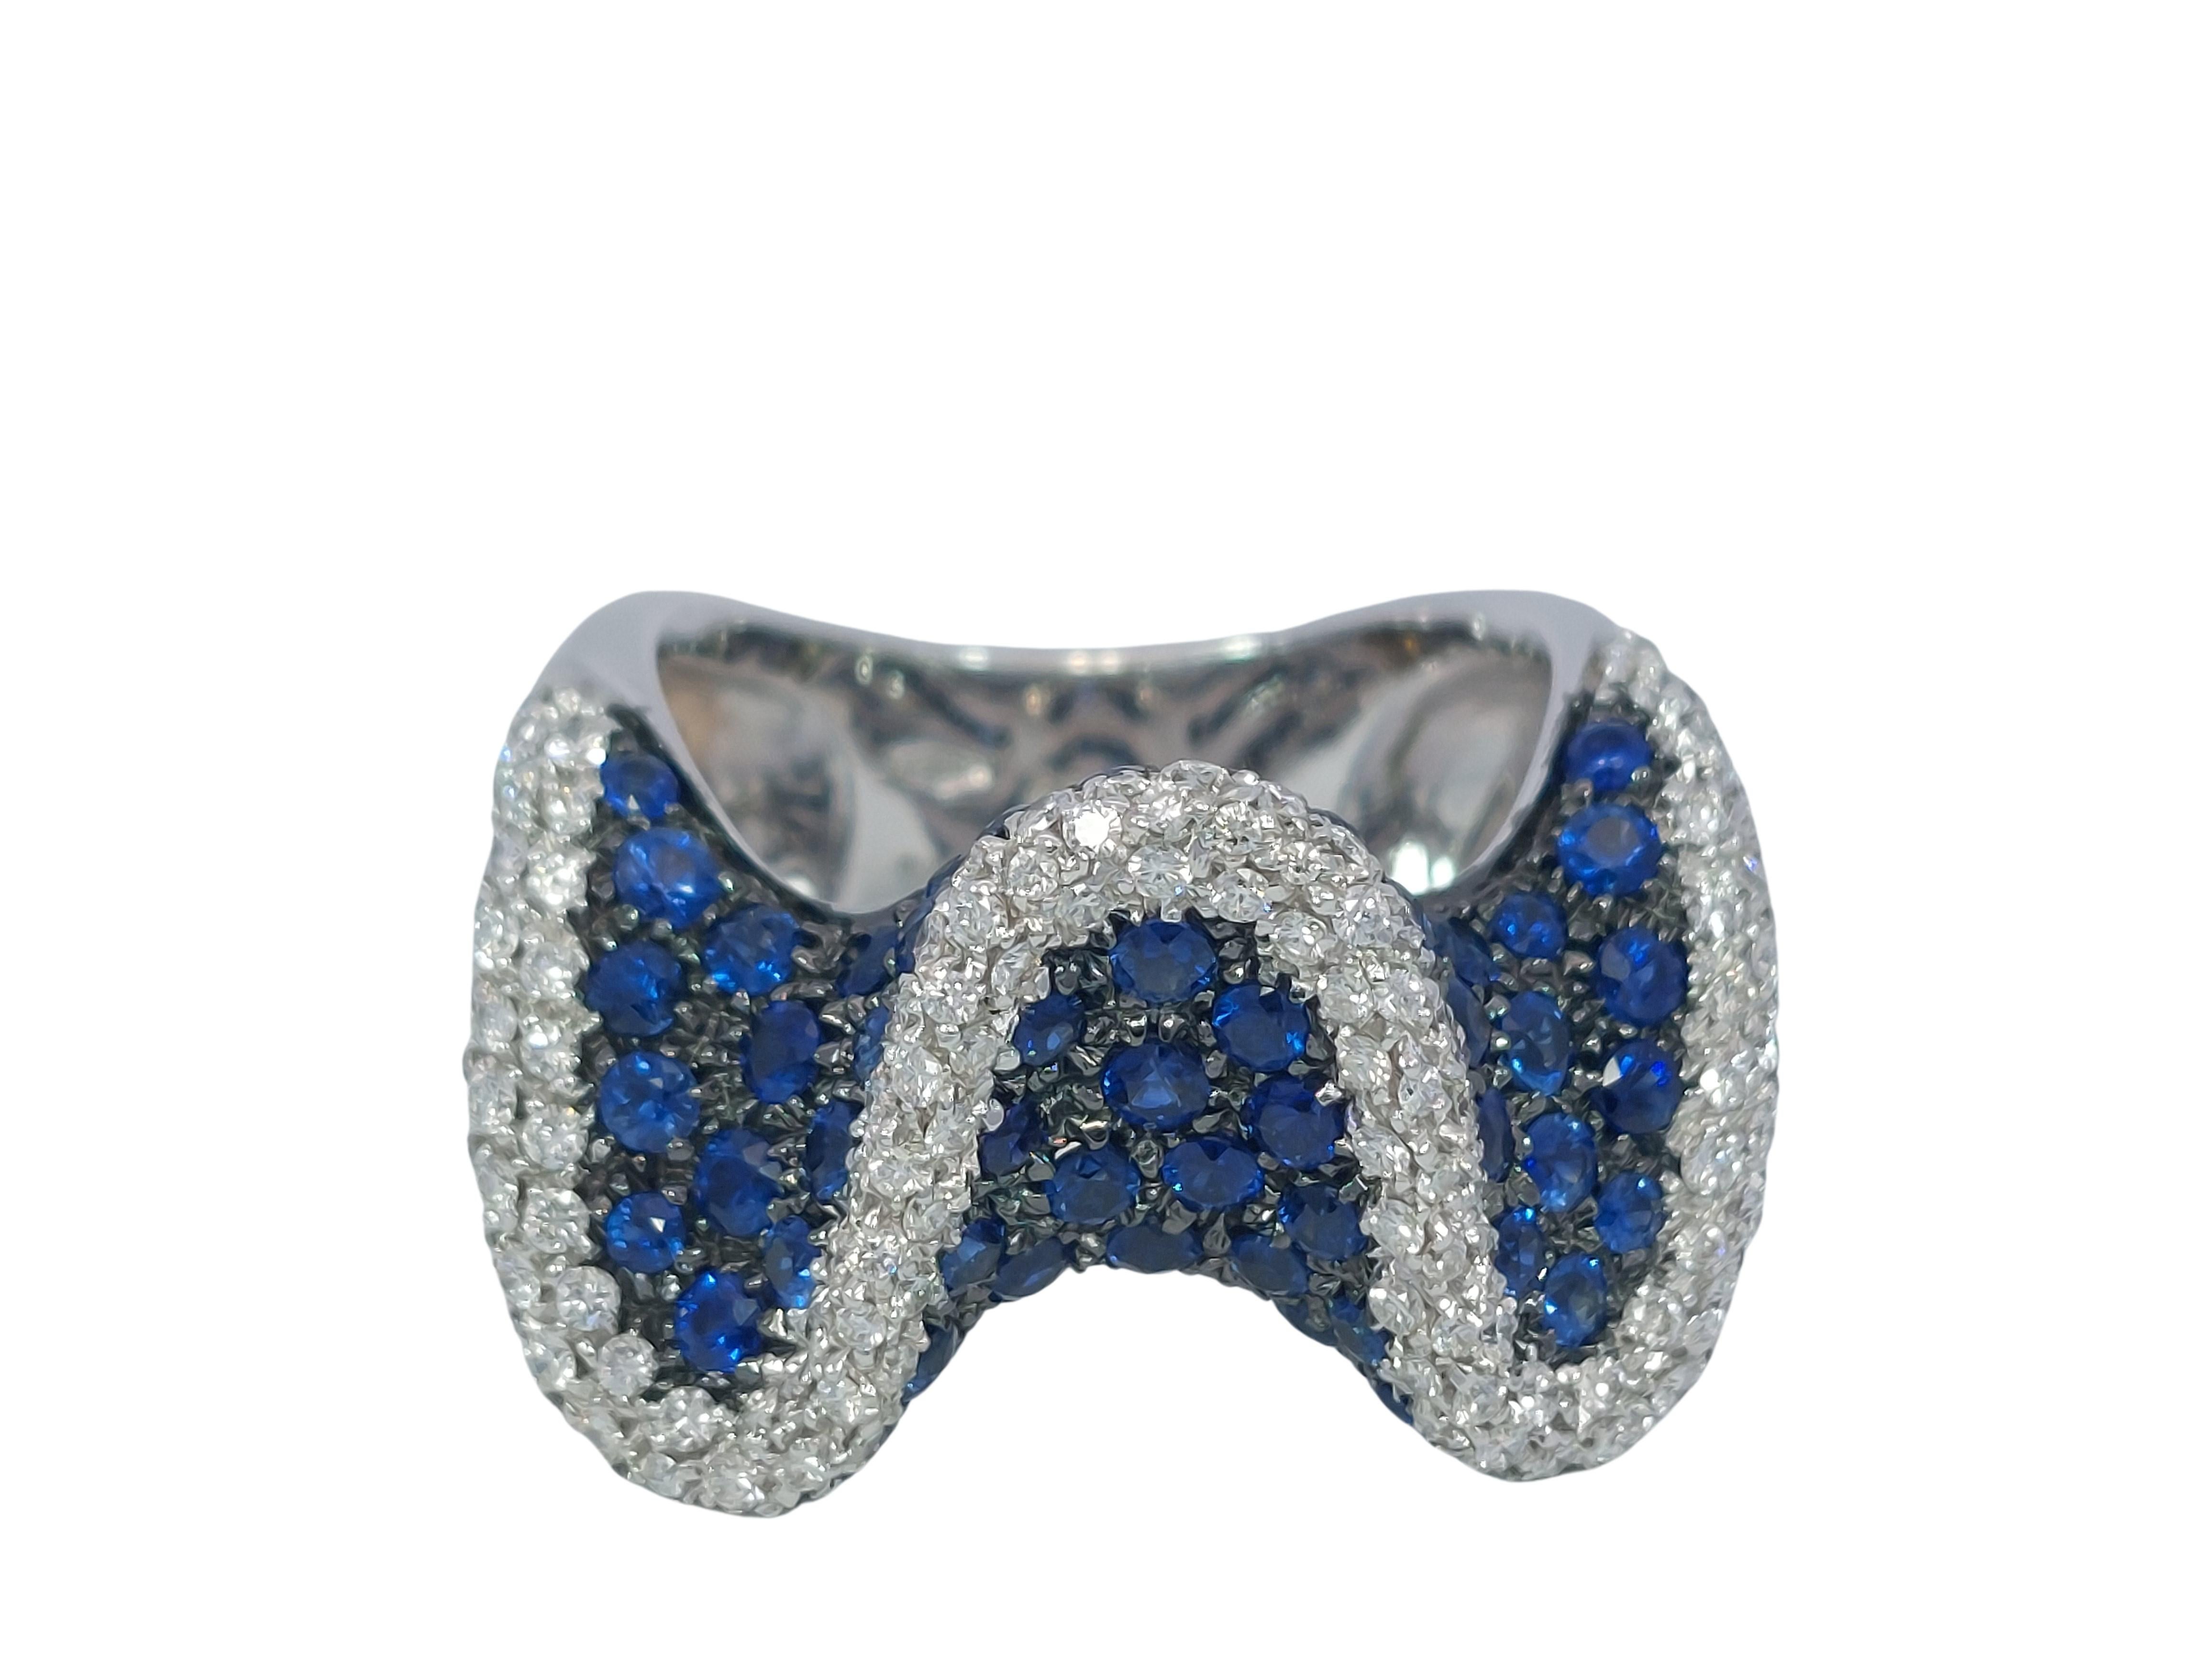 18kt White Gold Ring With 2.6ct Diamonds and 2.8ct Blue Sapphire

Diamonds:  brilliant cut diamonds together approx. 2.60ct

Sapphires: blue sapphires together approx. 2.80ct

Material: 18kt white gold

Ring size: 53 EU / 6.5 US (can be resized for